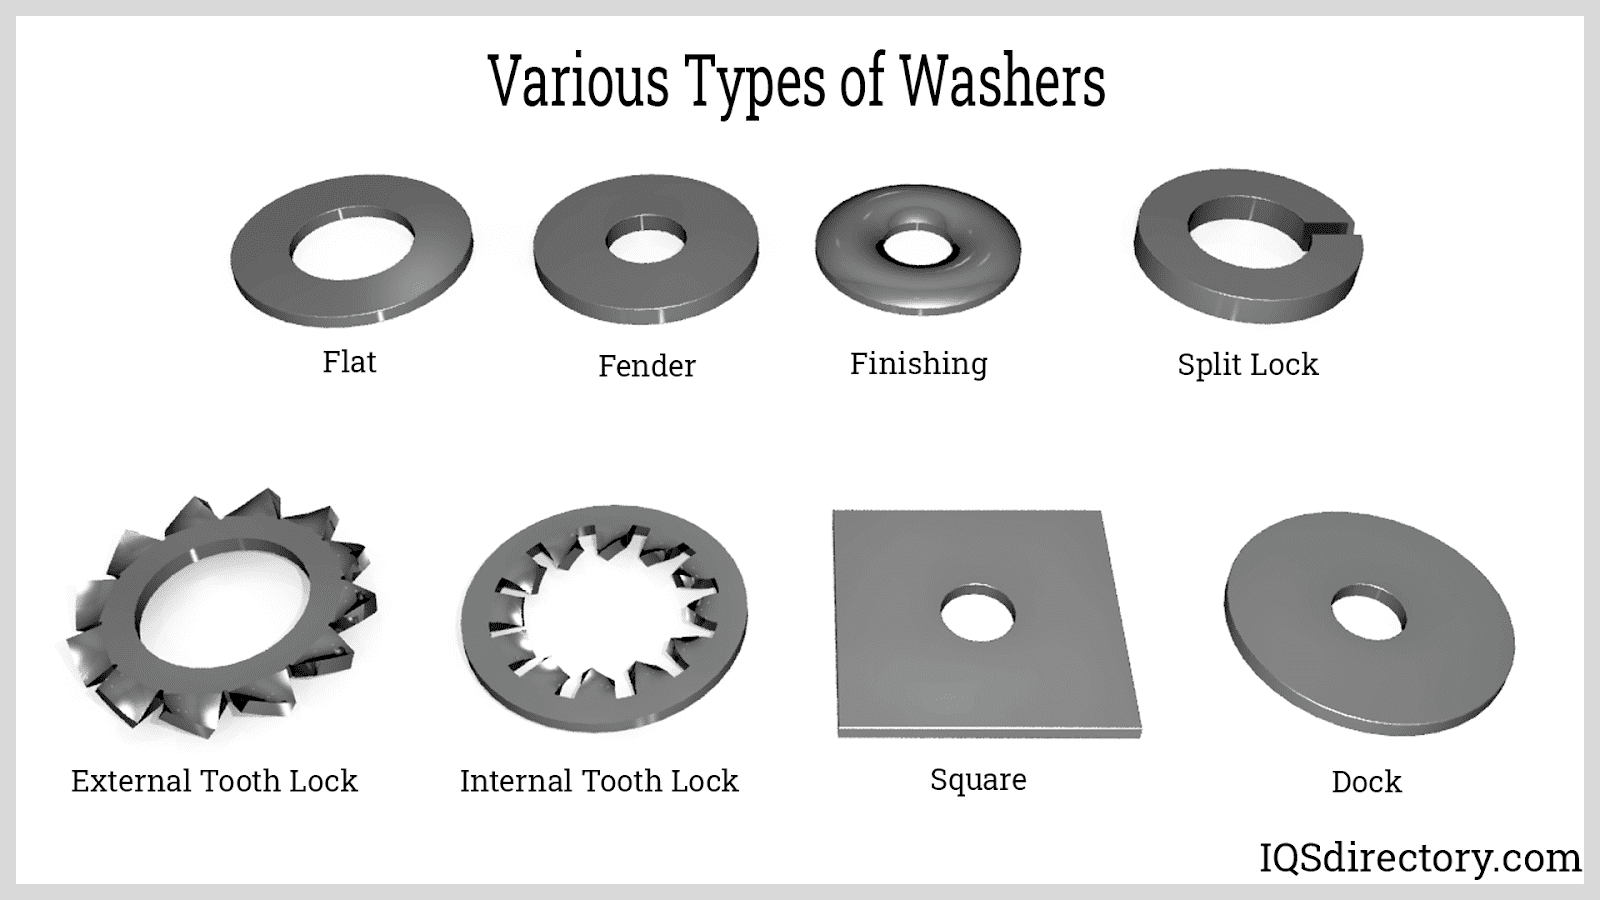 Fastener What Is It? How Is It Used? Types Of, Materials